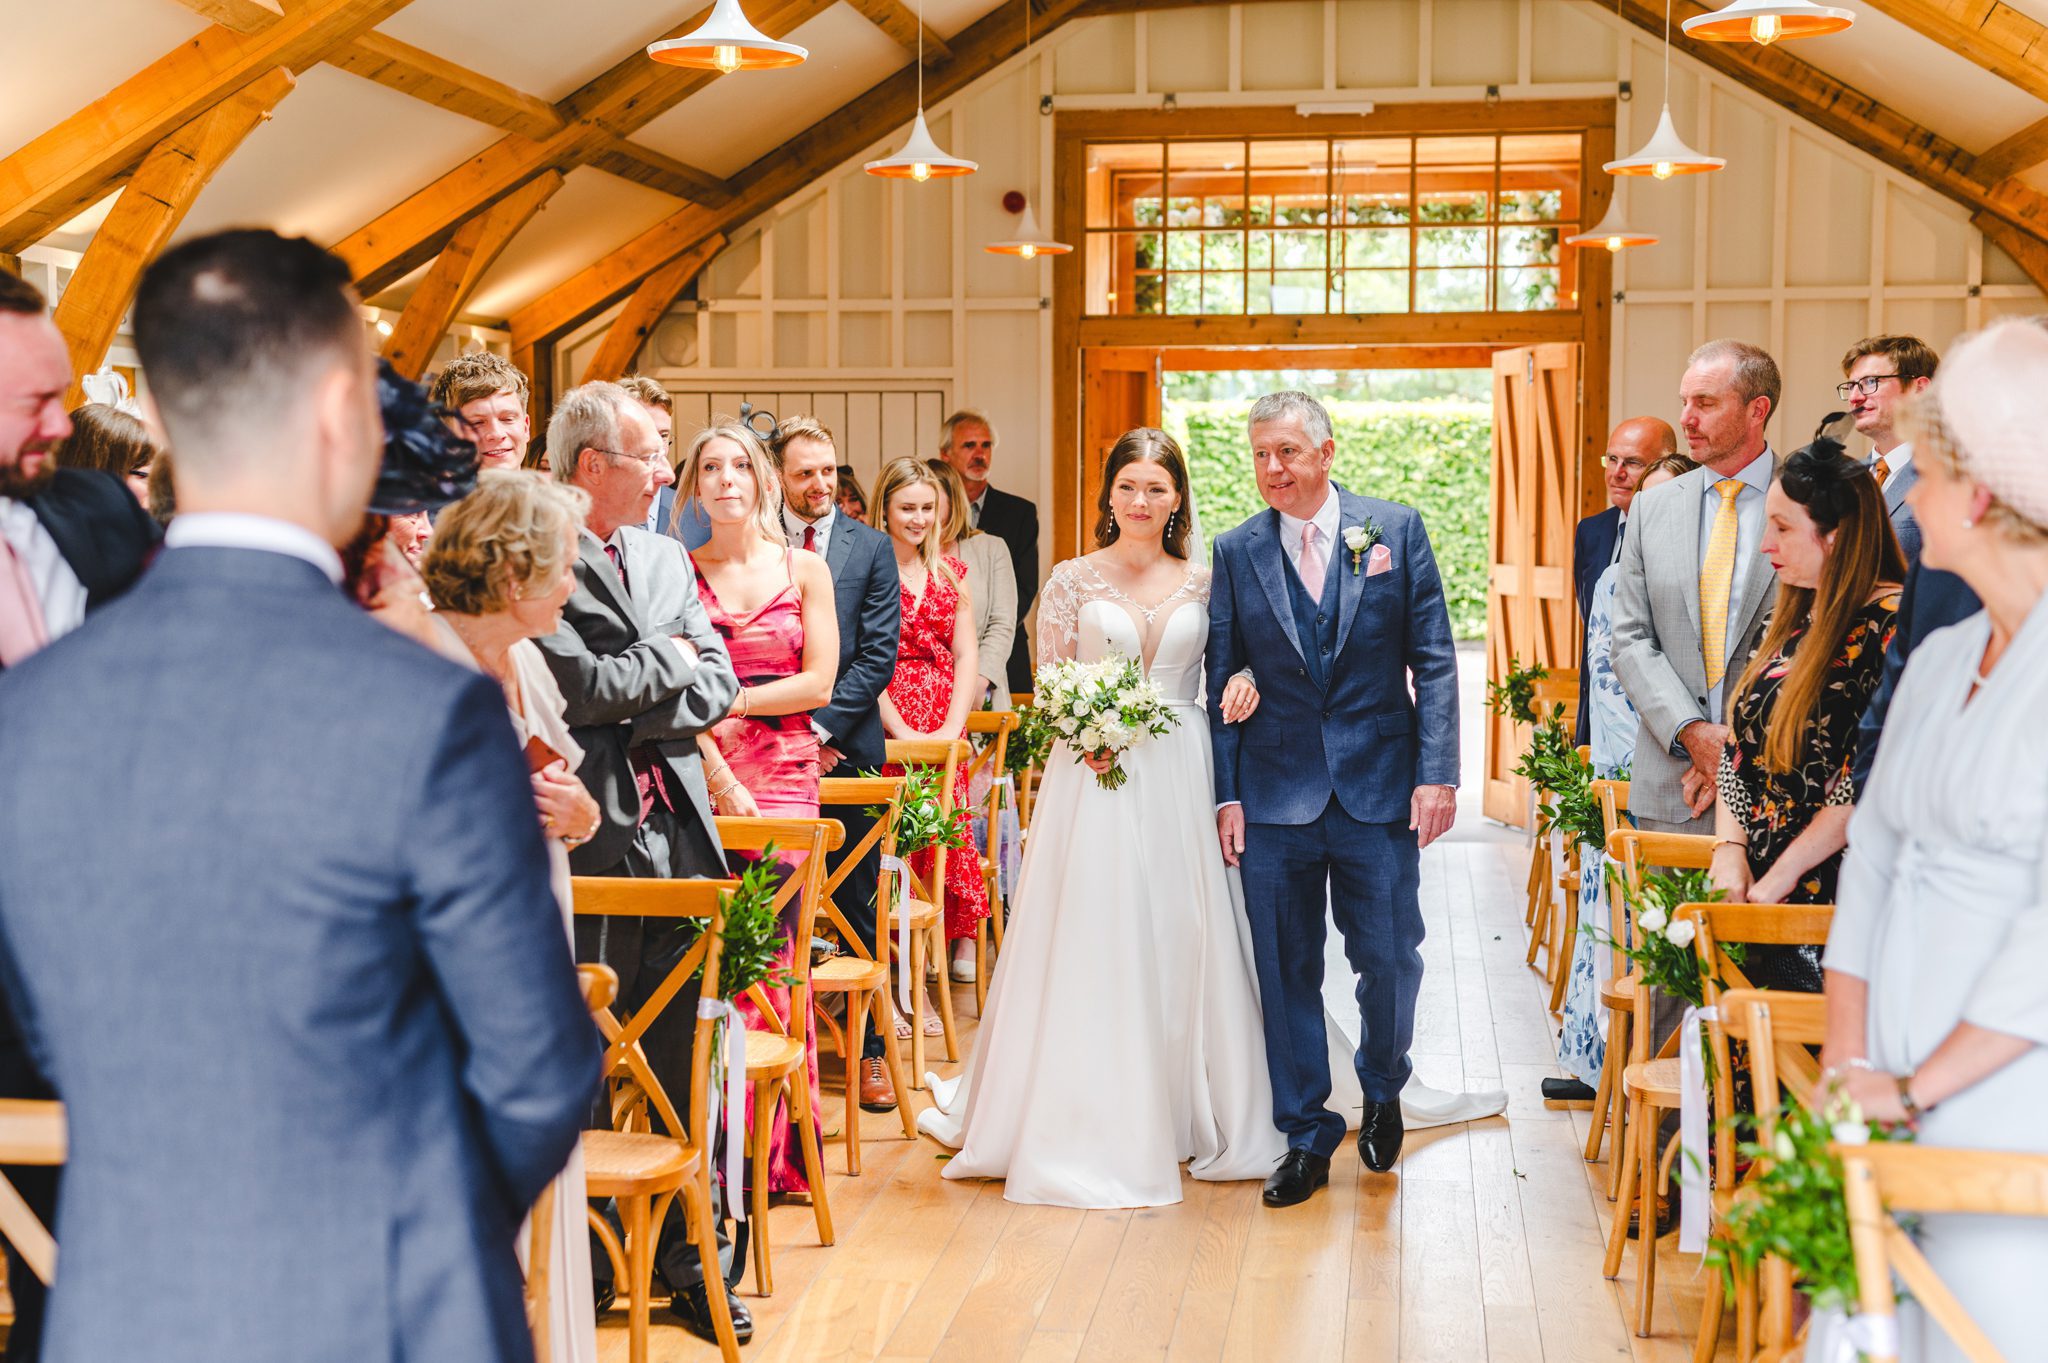 Hyde House wedding ceremony in The Grange